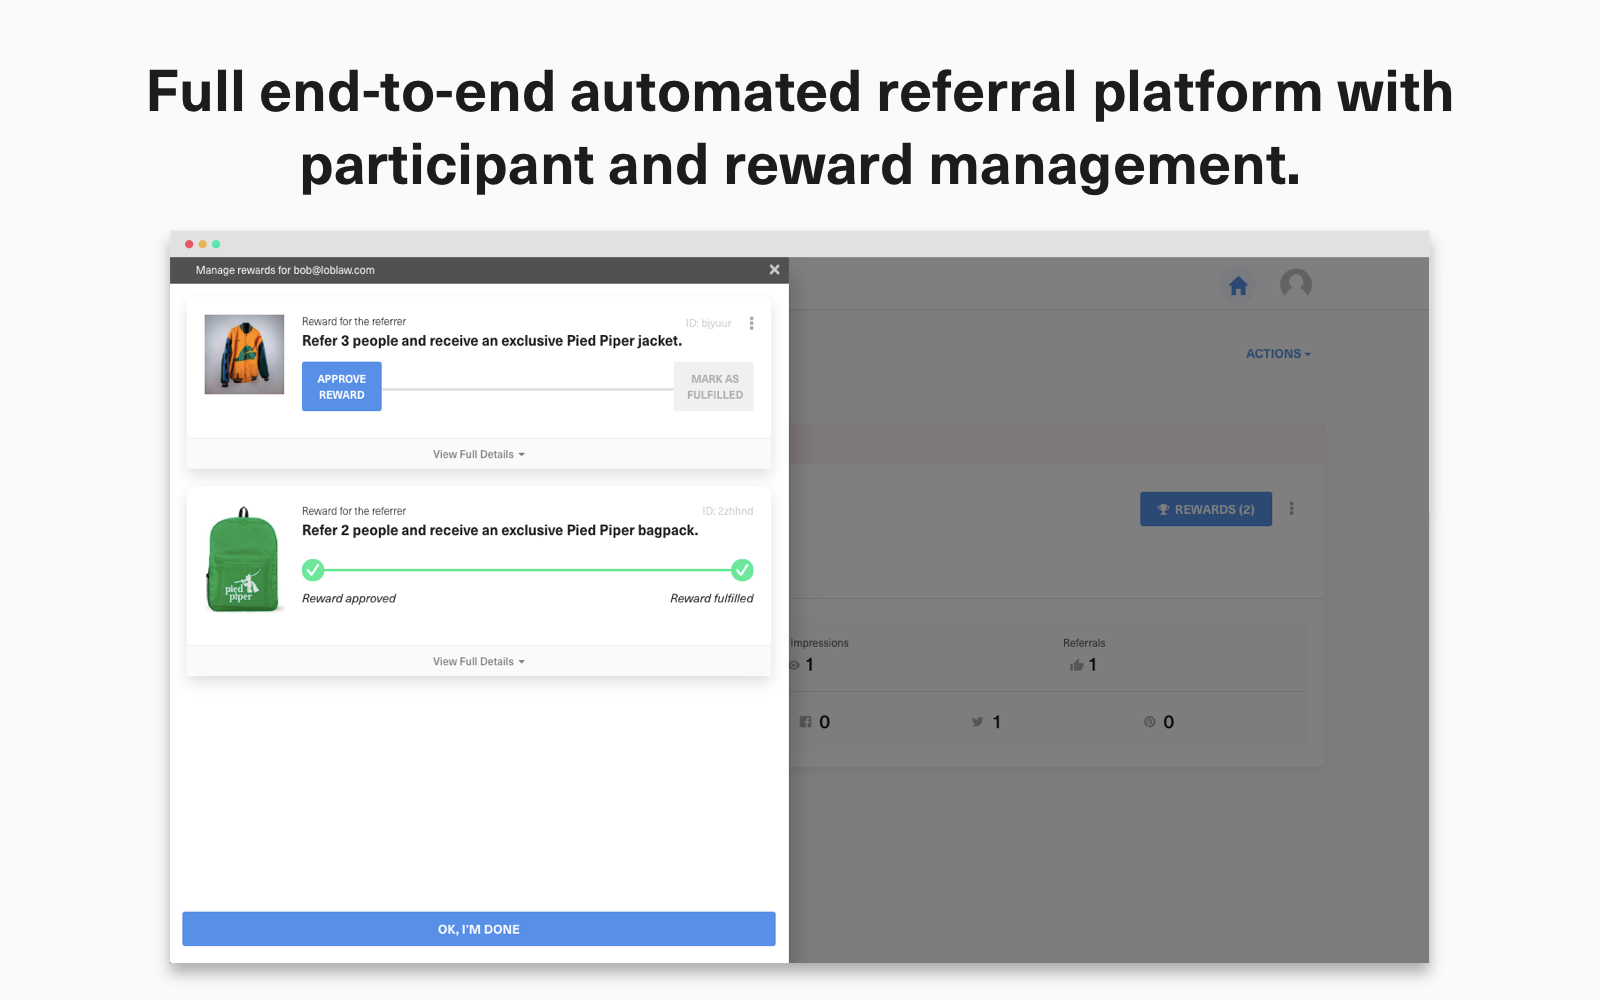 Full end-to-end automated referral platform with participant and reward management.